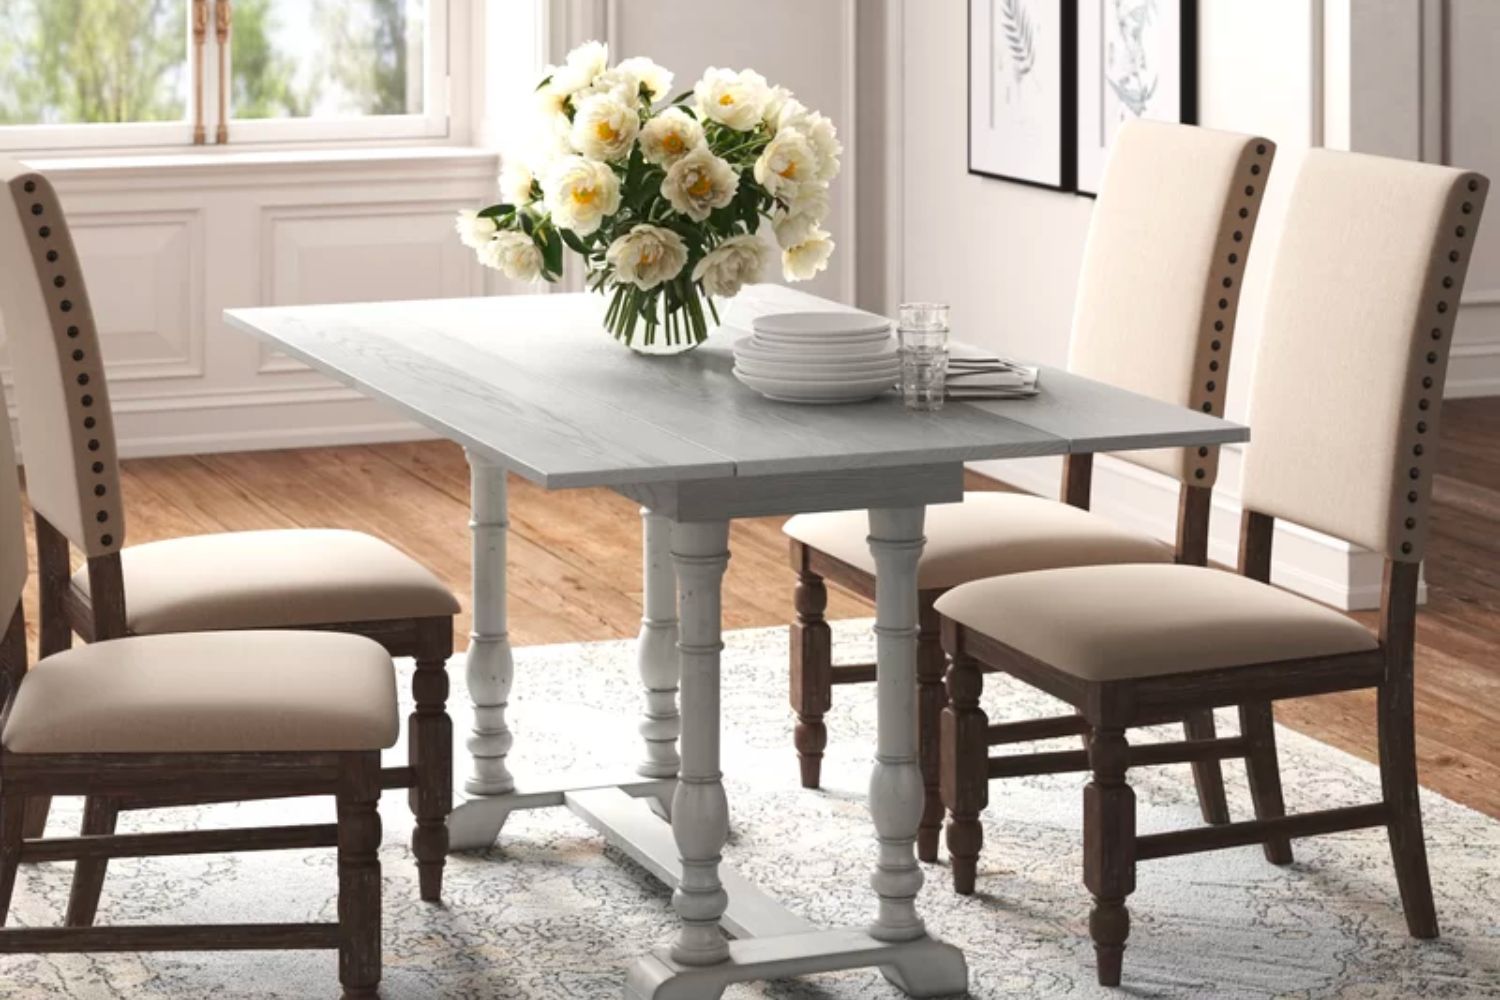 Deals Roundup Cyber Monday Furniture 11/29: Kelly Clarkson Home Charleston Trestle Dining Table